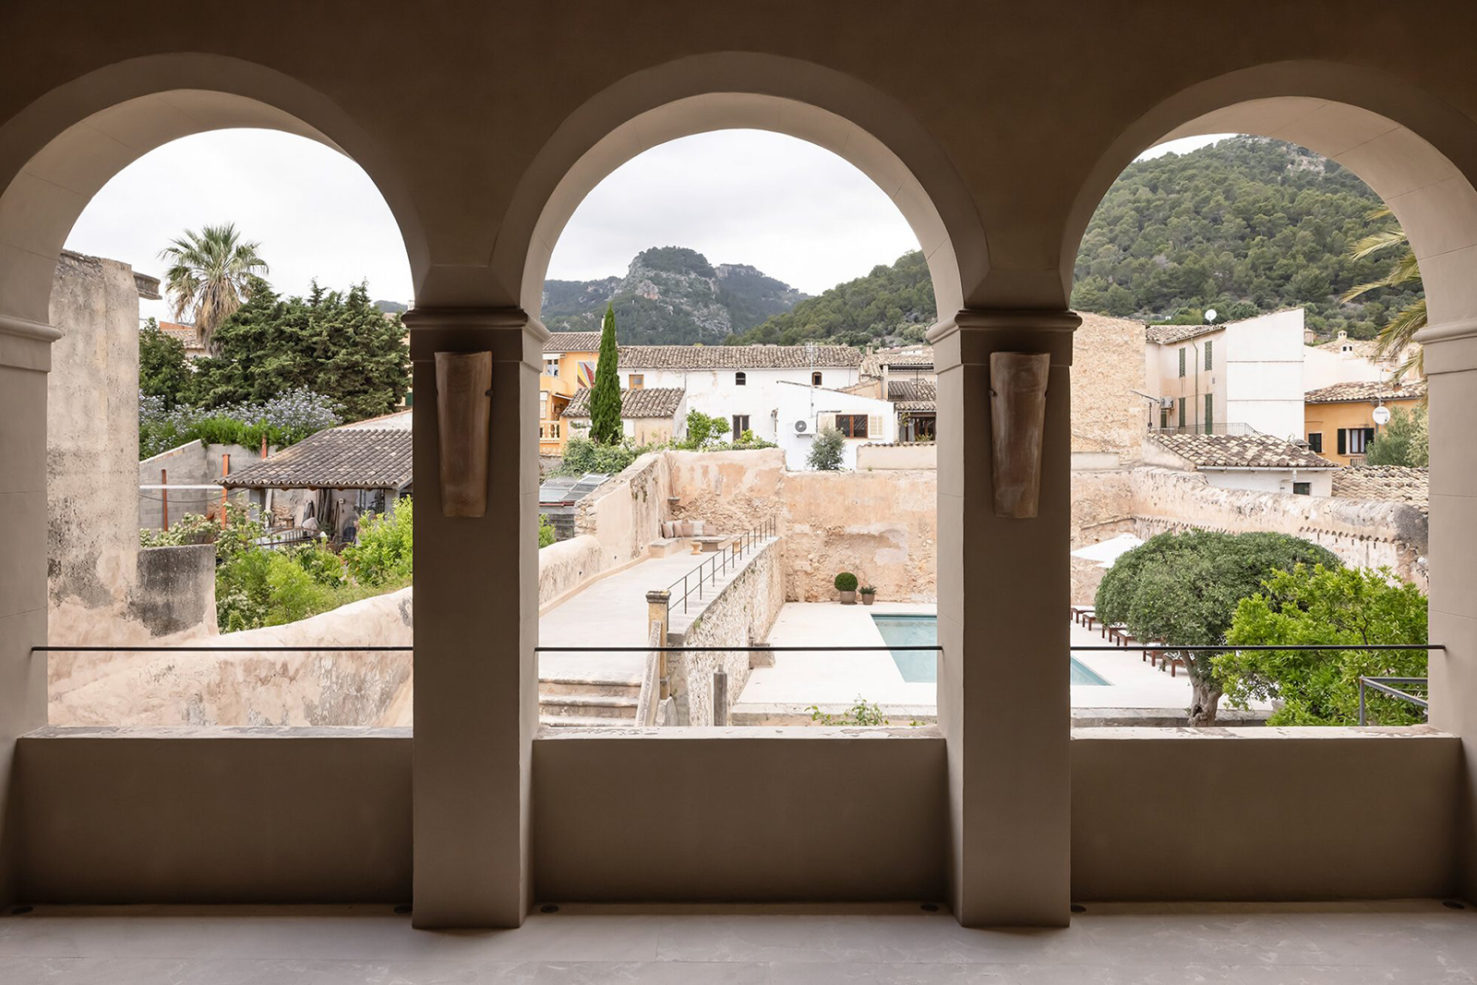 A renovated 100-year old Mallorcan townhouse